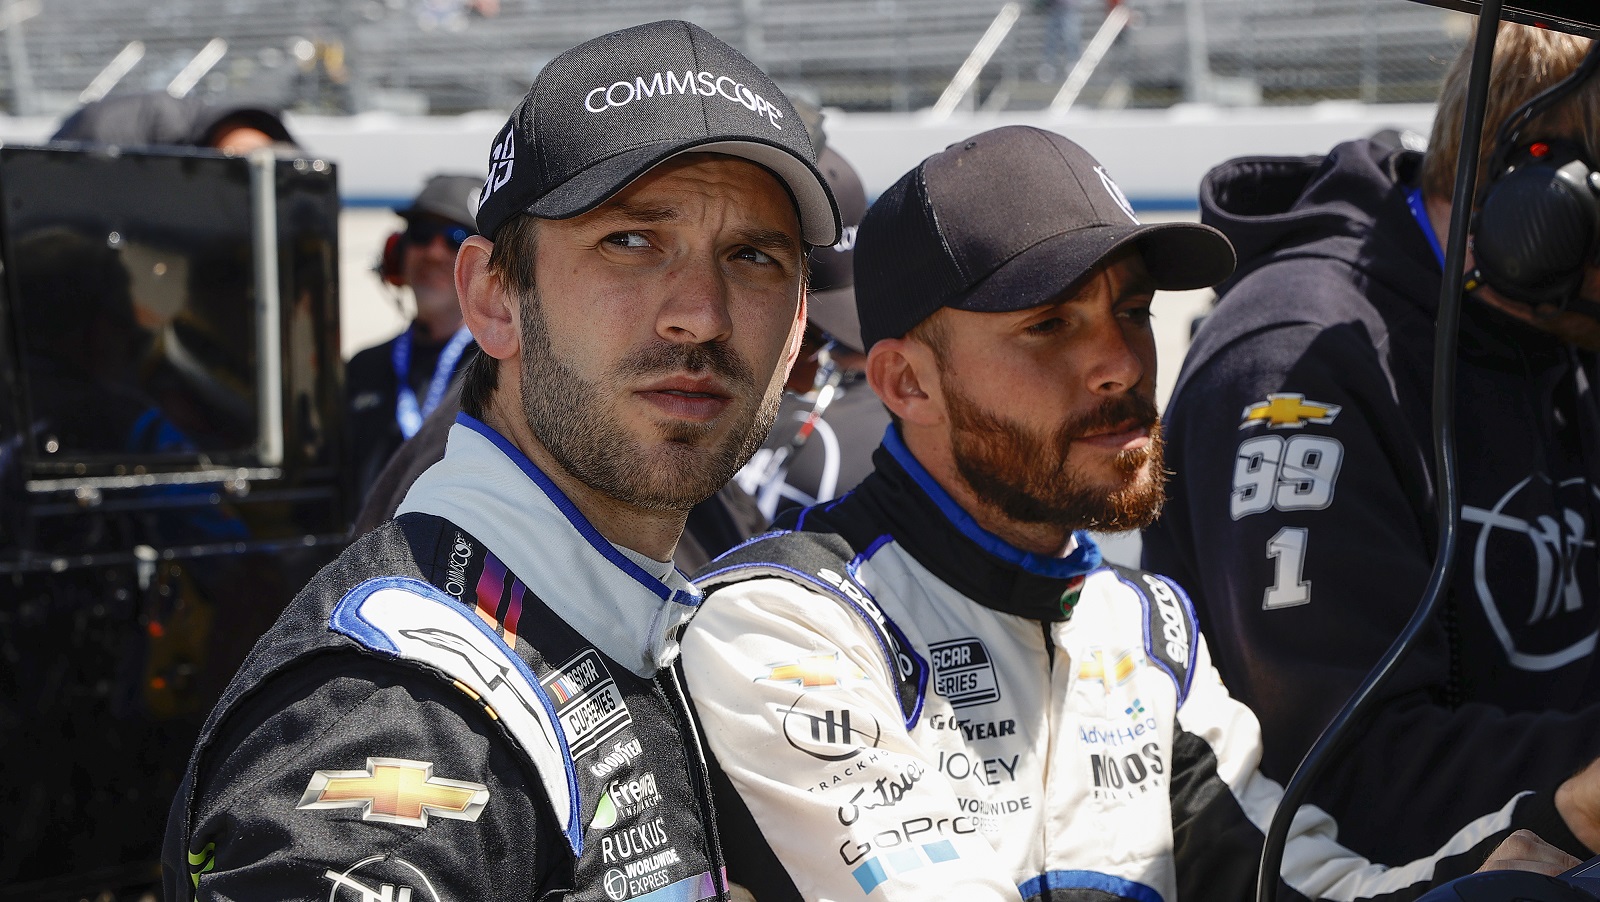 Daniel Suarez and Ross Chastain of Trackhouse Racing wait on the grid during qualifying for the DuraMAX Drydene 400 at Dover Motor Speedway on April 30, 2022.